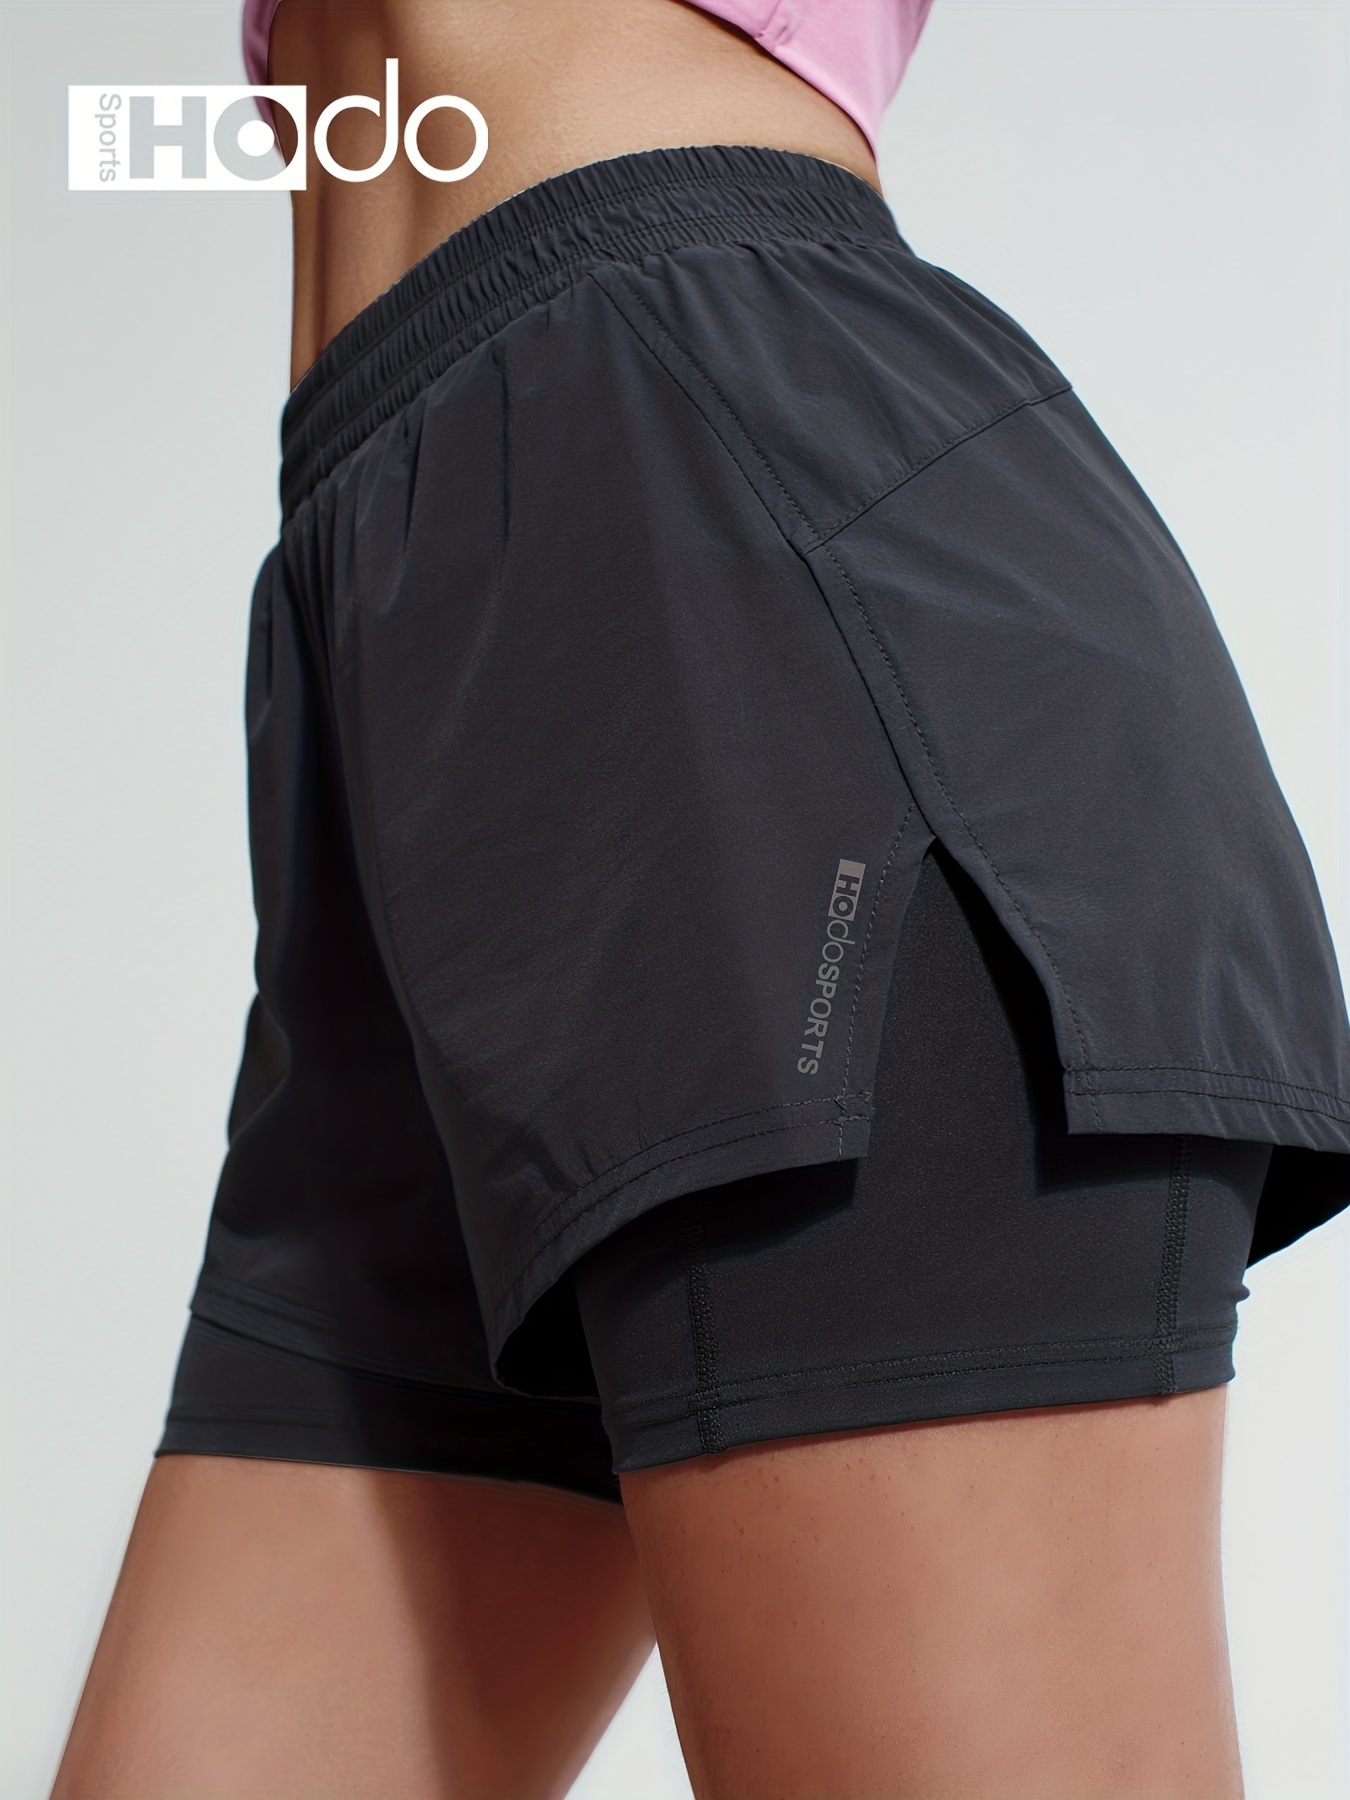 Women Running Shorts 2 in 1 Yoga Shorts with Phone Pocket Double